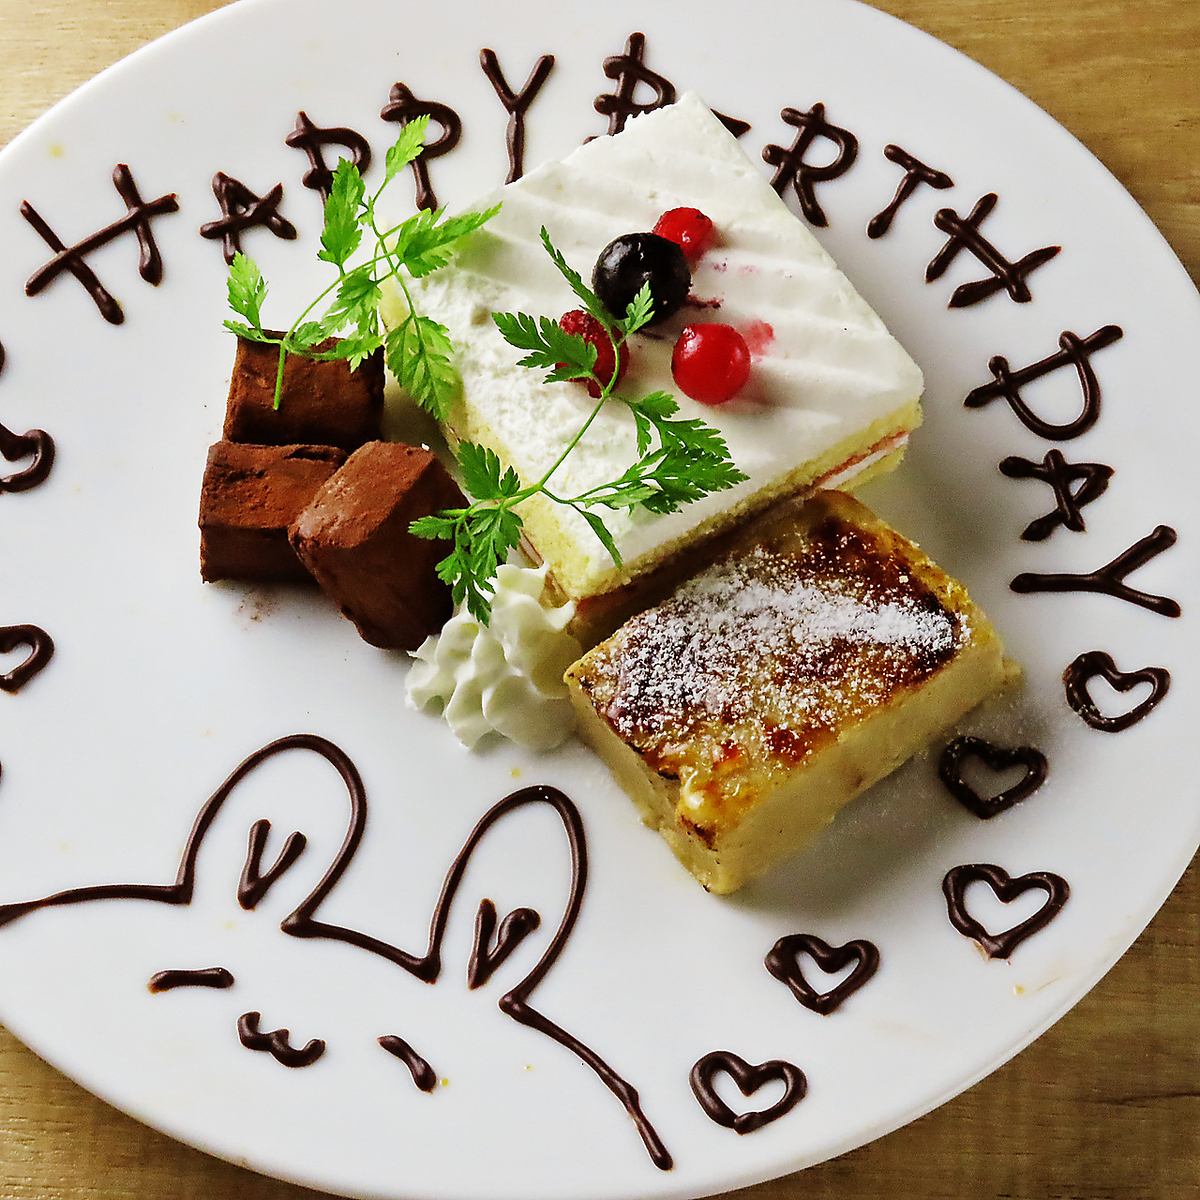 Also recommended for birthdays and anniversaries! Our special plate is 1,390 yen (tax included)